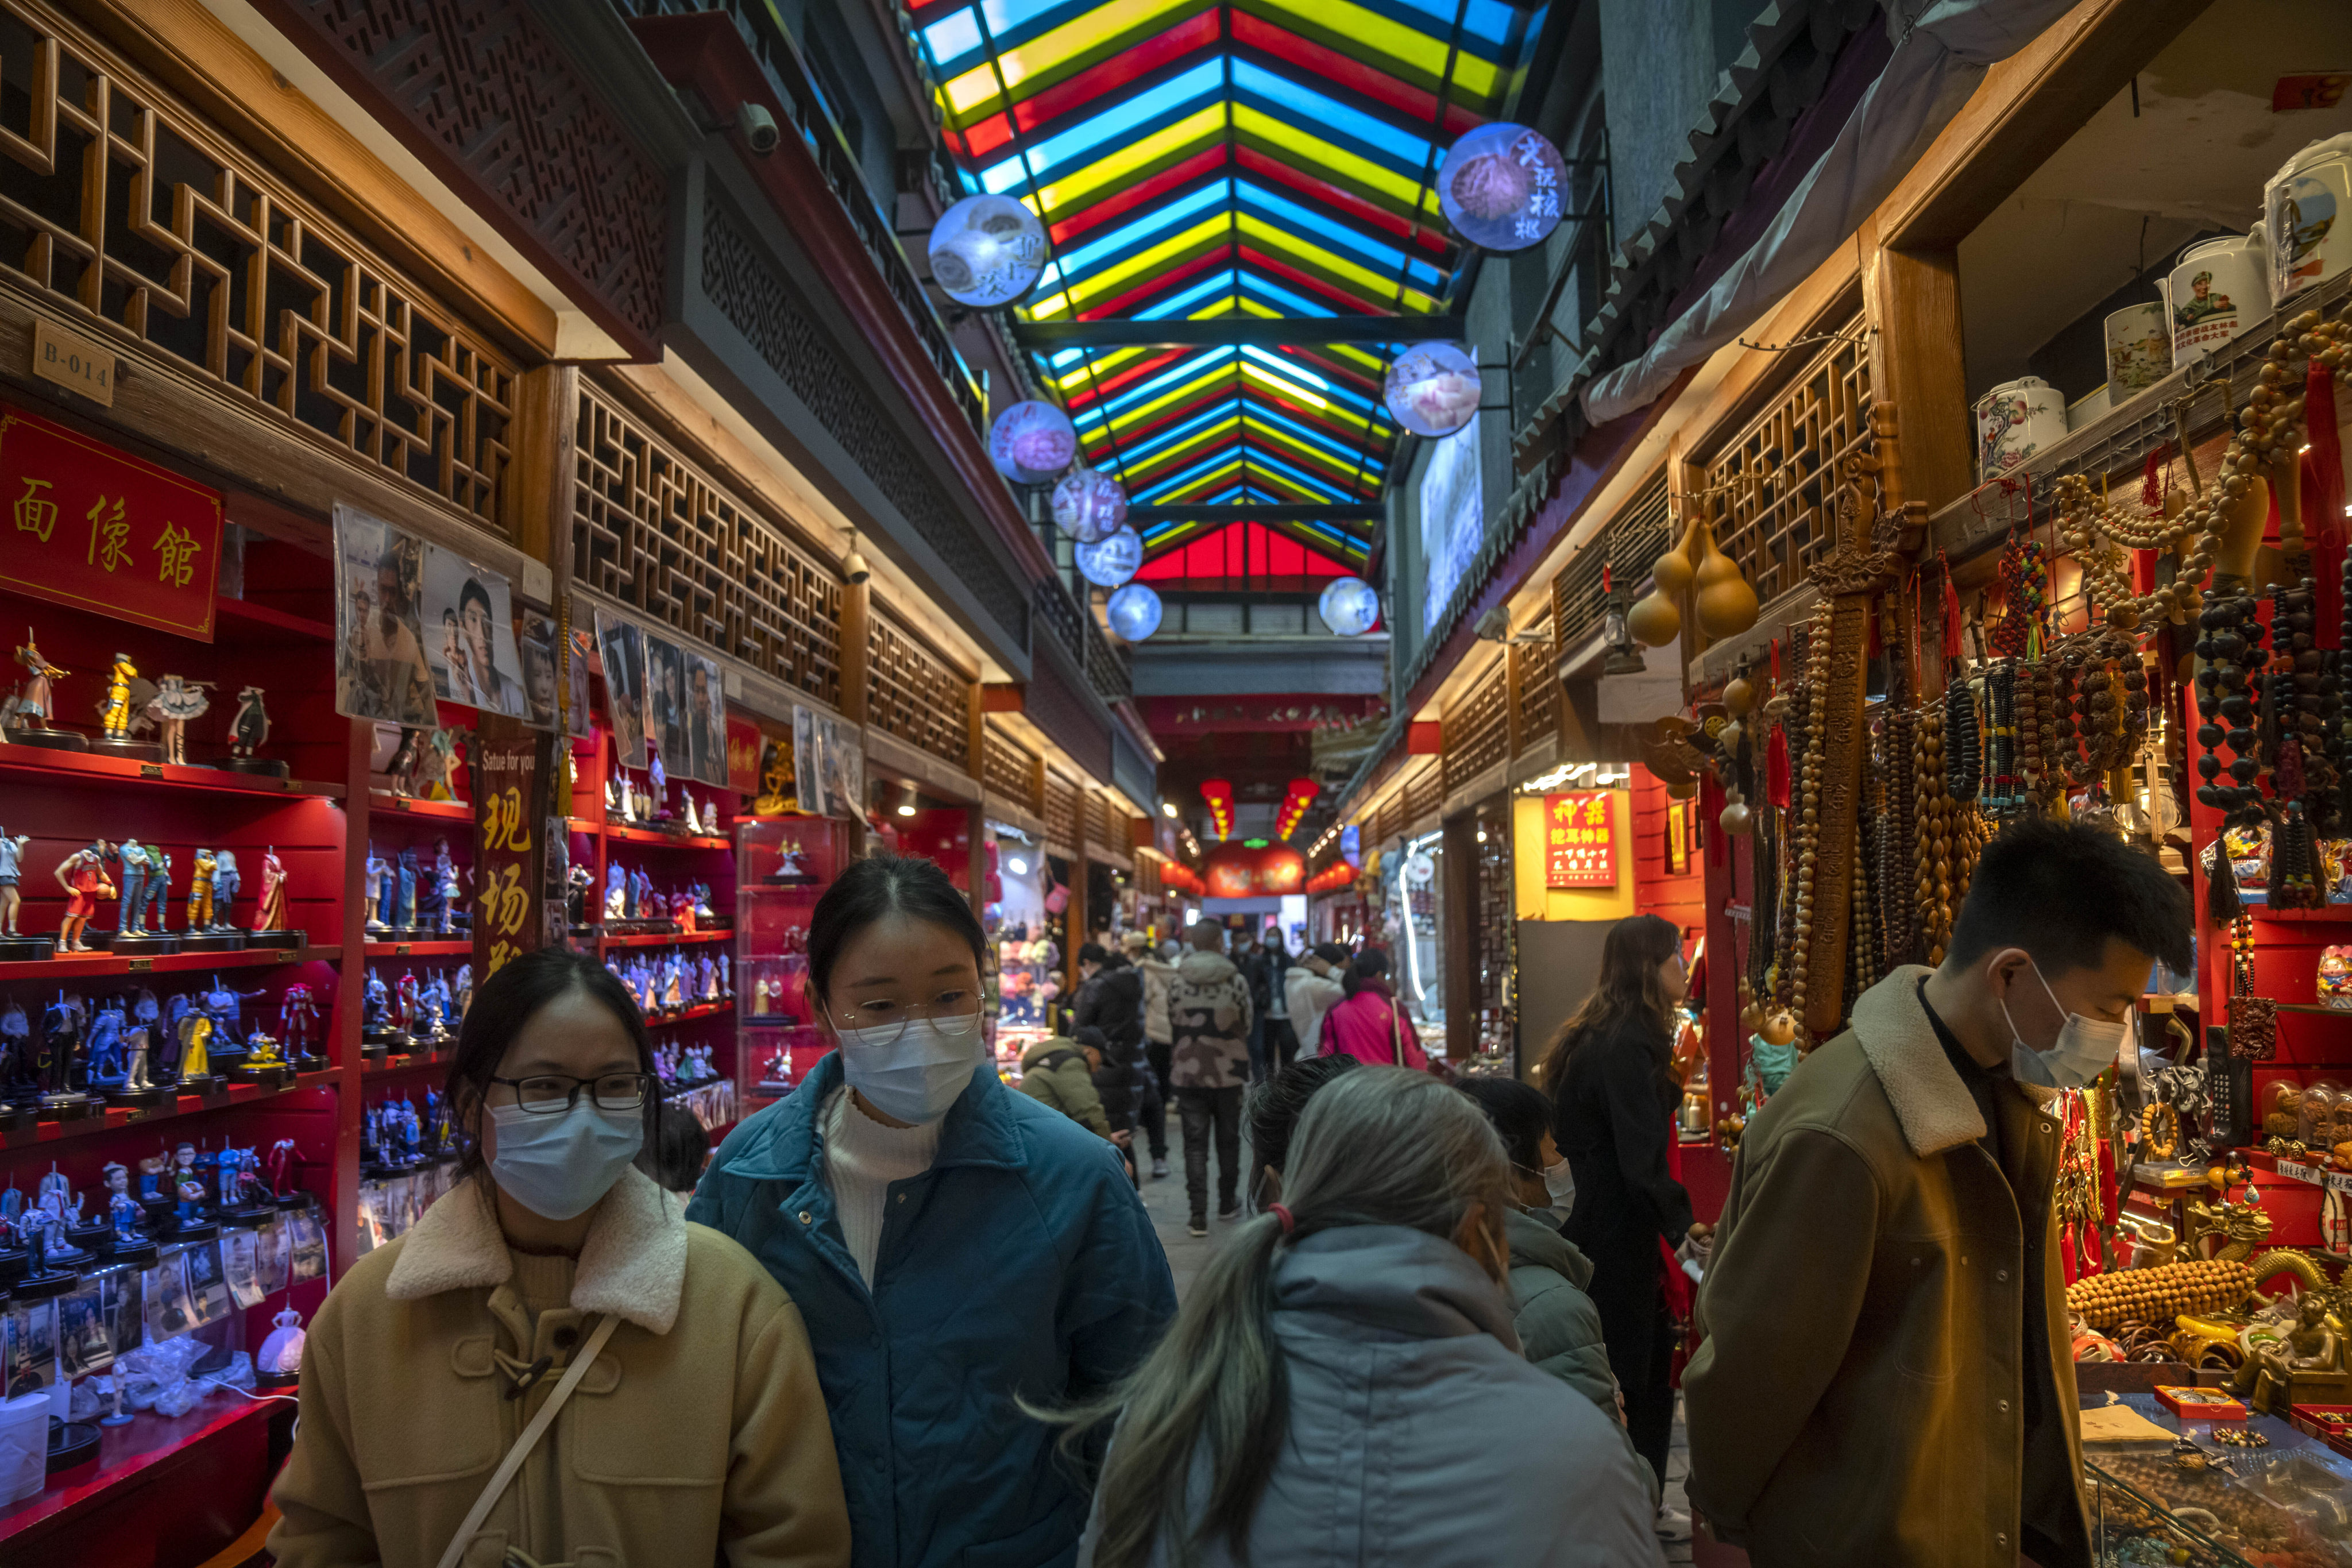 Visitors look at shops selling trinkets and souvenirs along a tourist shopping street in Beijing on February 28. China’s recovery is largely driven by a rebound in consumption and this counter-trend recovery can play a key role in supporting Asia’s growth. Photo: AP